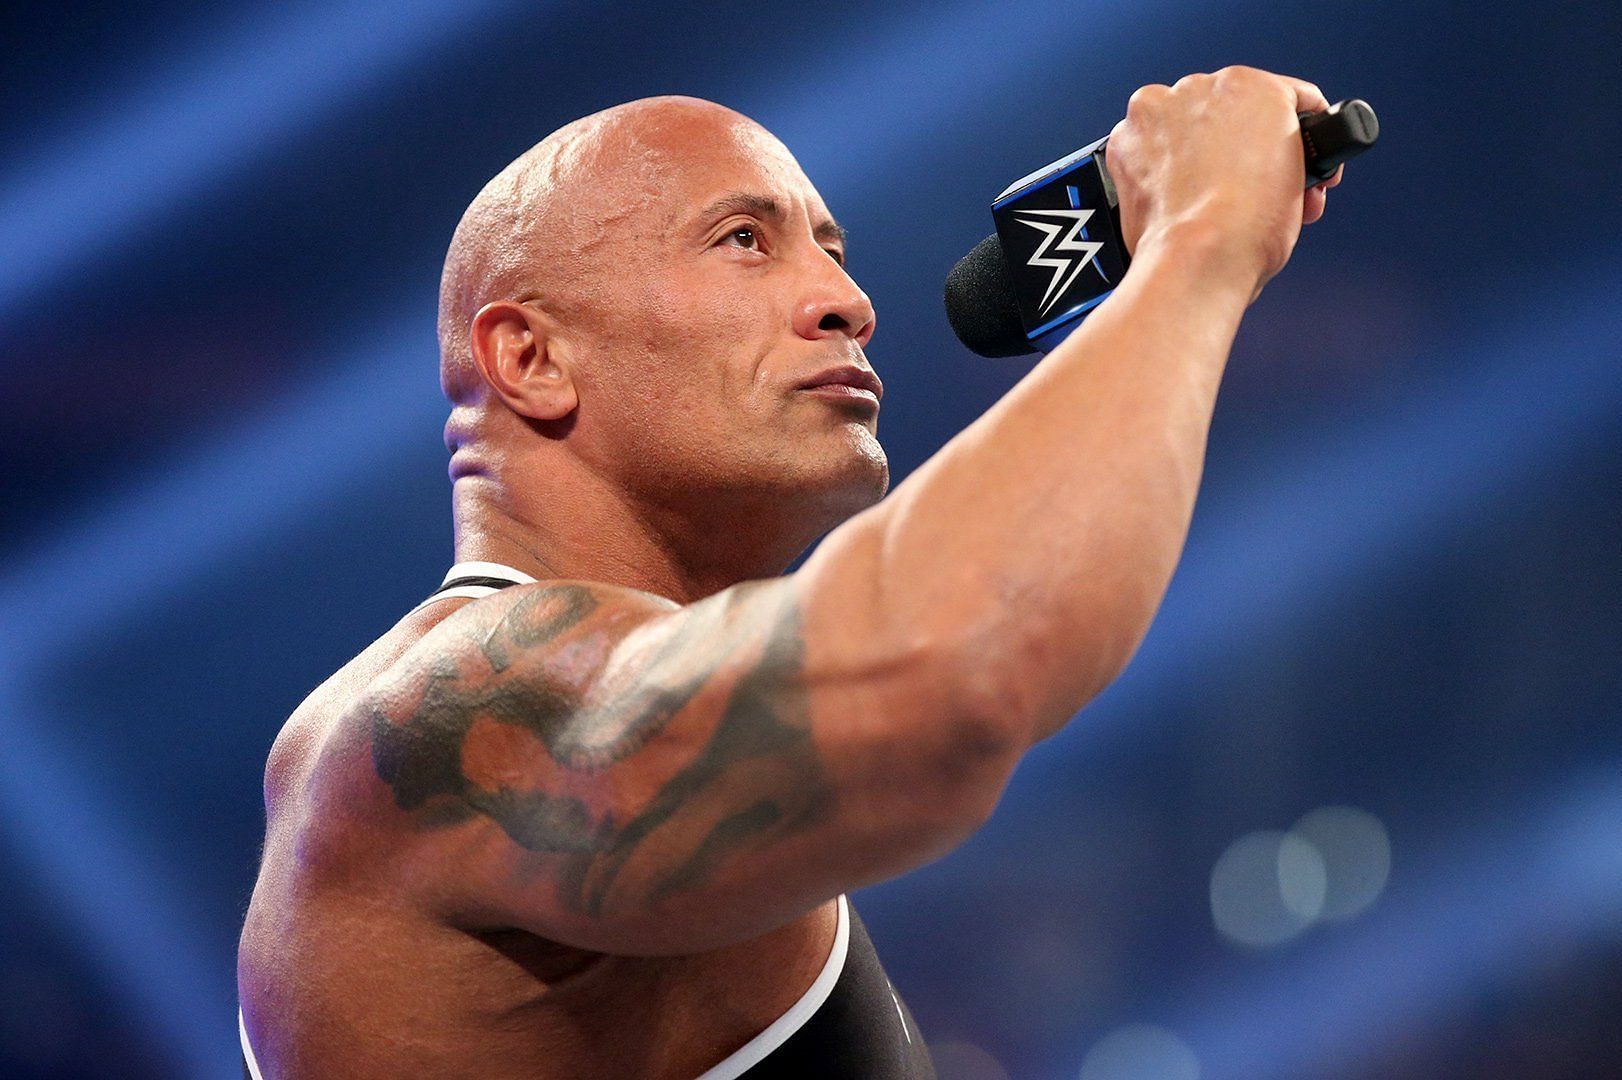 Dwayne Johnson has sent an interesting message to a current champion